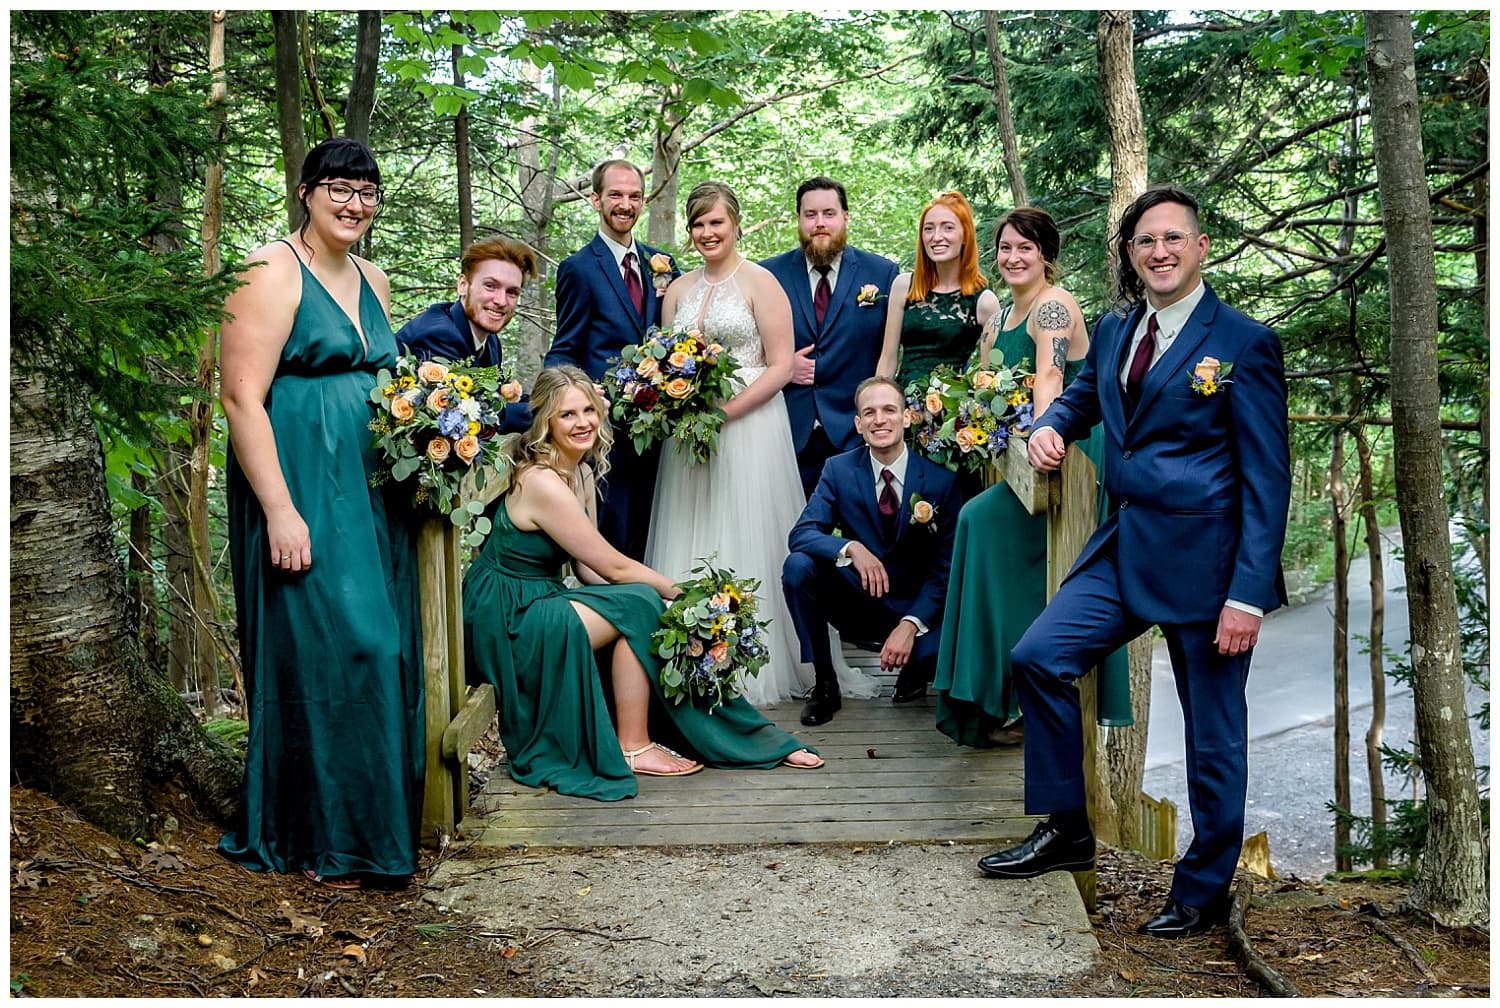 The bride and groom pose with their wedding party for their wedding photos in the forest surrounding Sir Sandford Fleming Park in Halifax, NS.